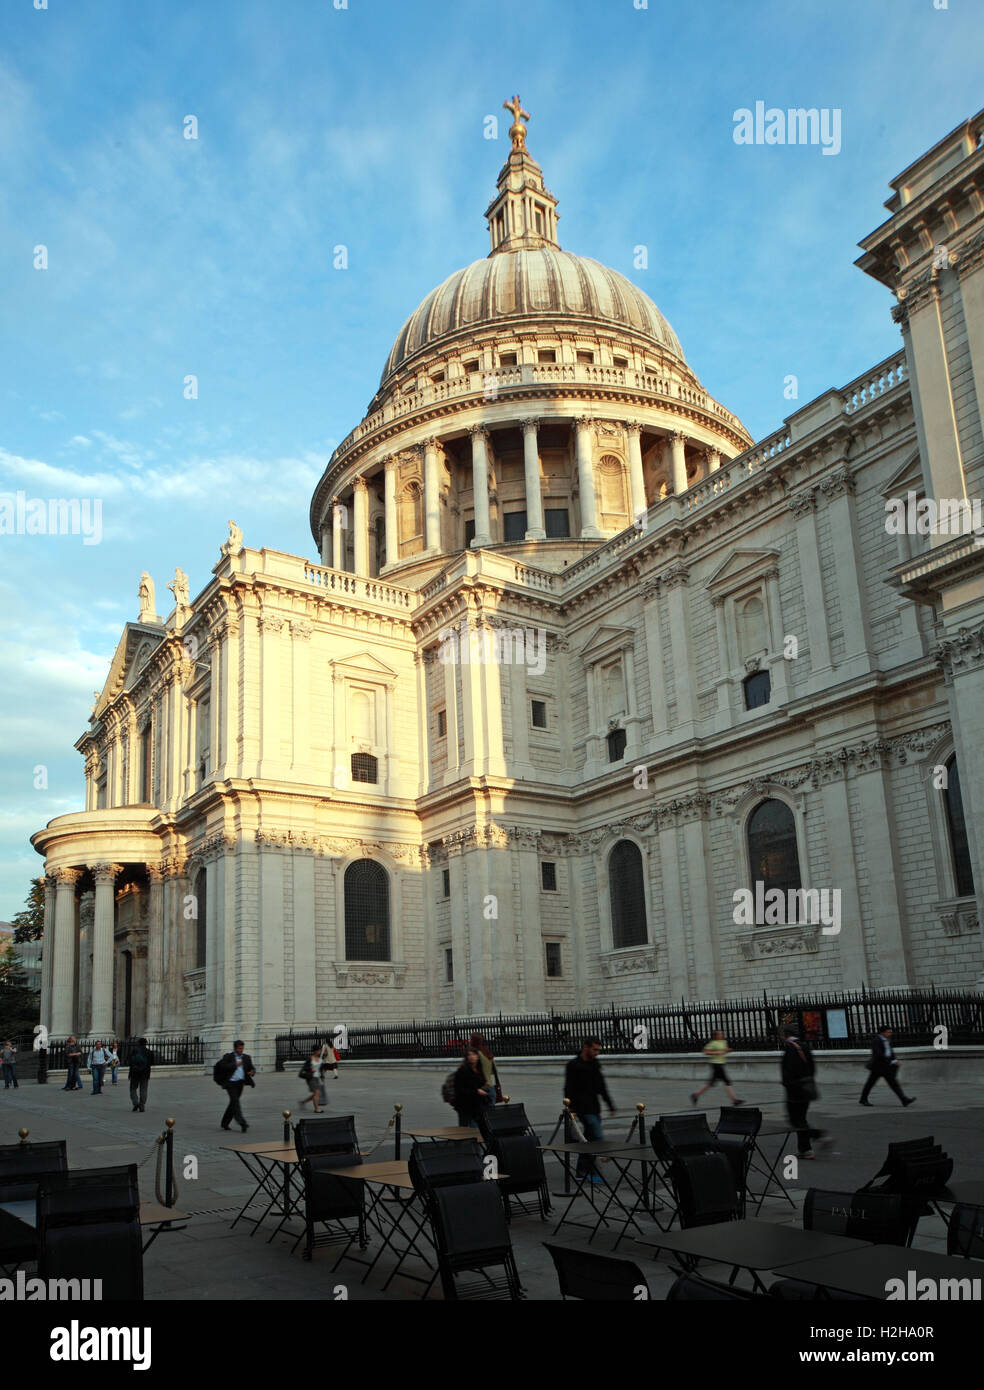 St Pauls Cathedral London am Abend Stockfoto